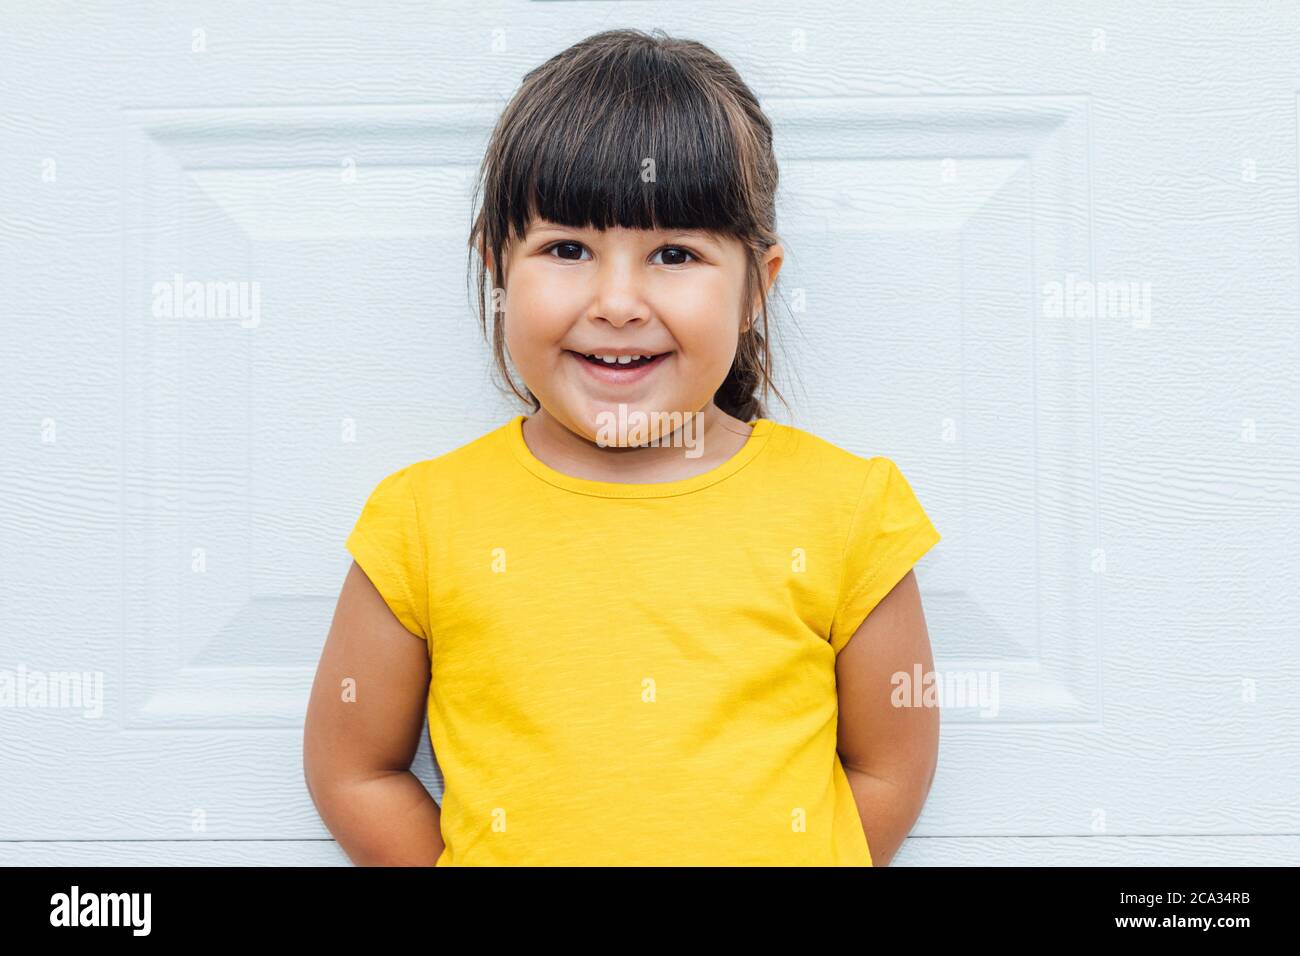 Adorable little girl with black hair wearing a yellow shirt leaning against white background. Stock Photo